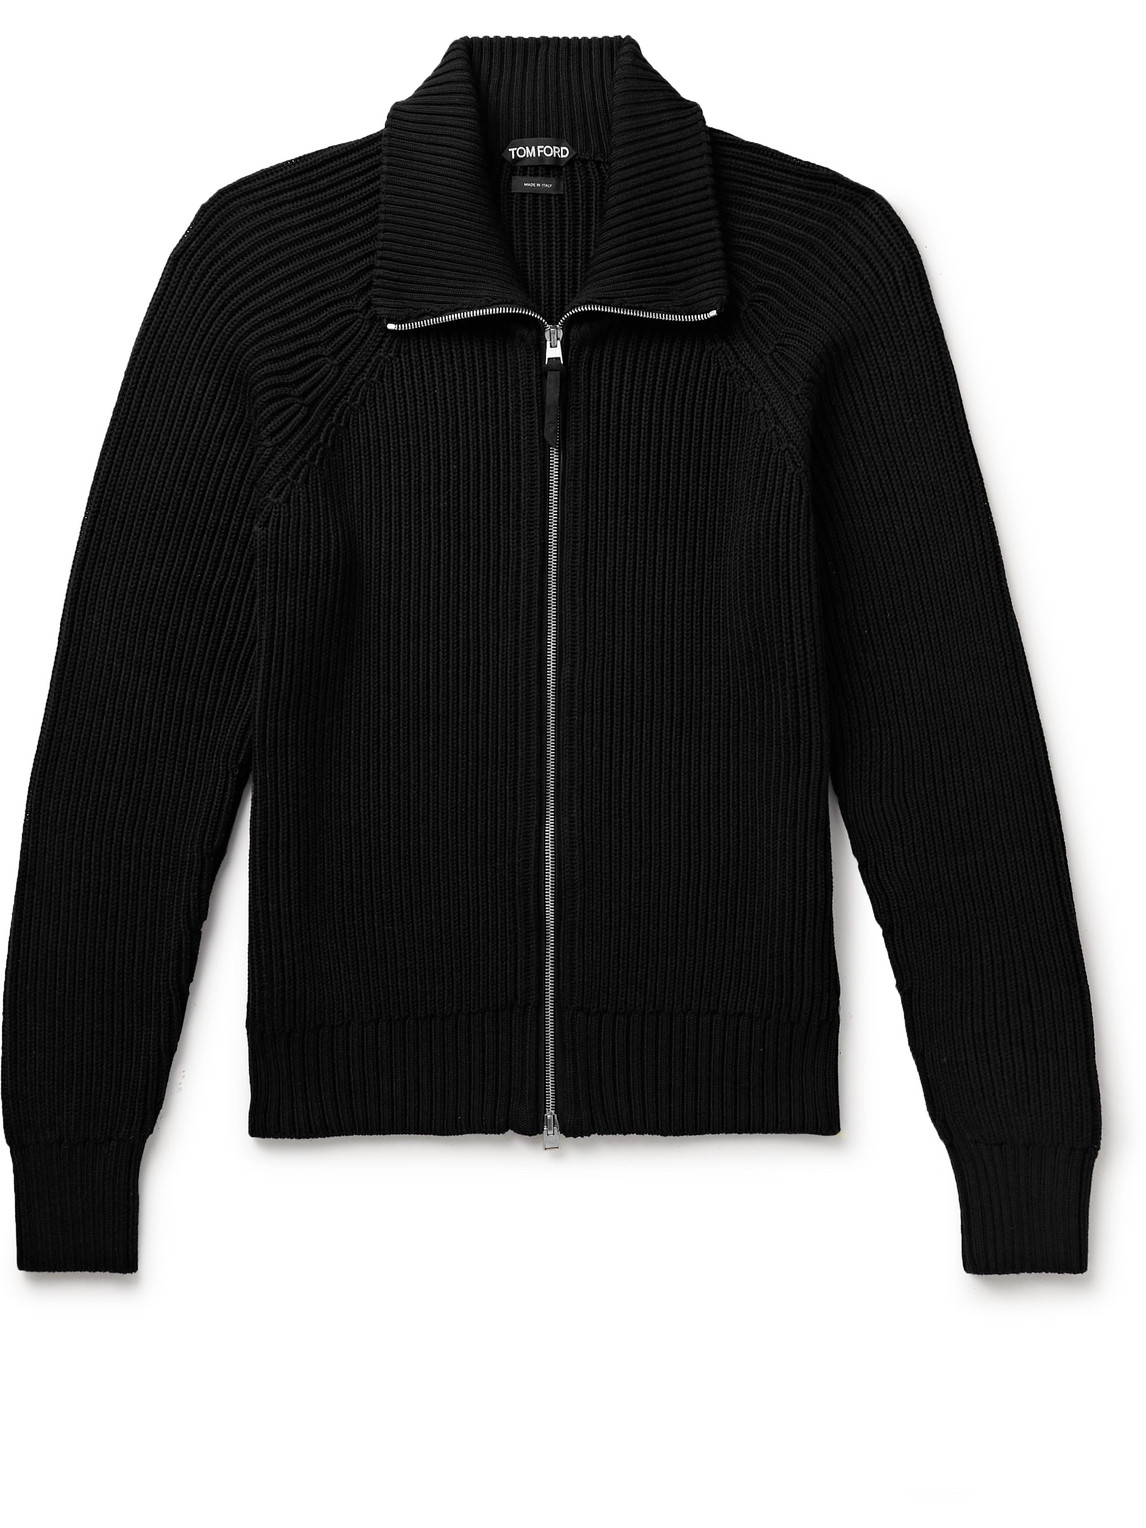 TOM FORD - Slim-Fit Ribbed Silk and Cotton-Blend Zip-Up Cardigan - Men - Black - IT 52 von TOM FORD